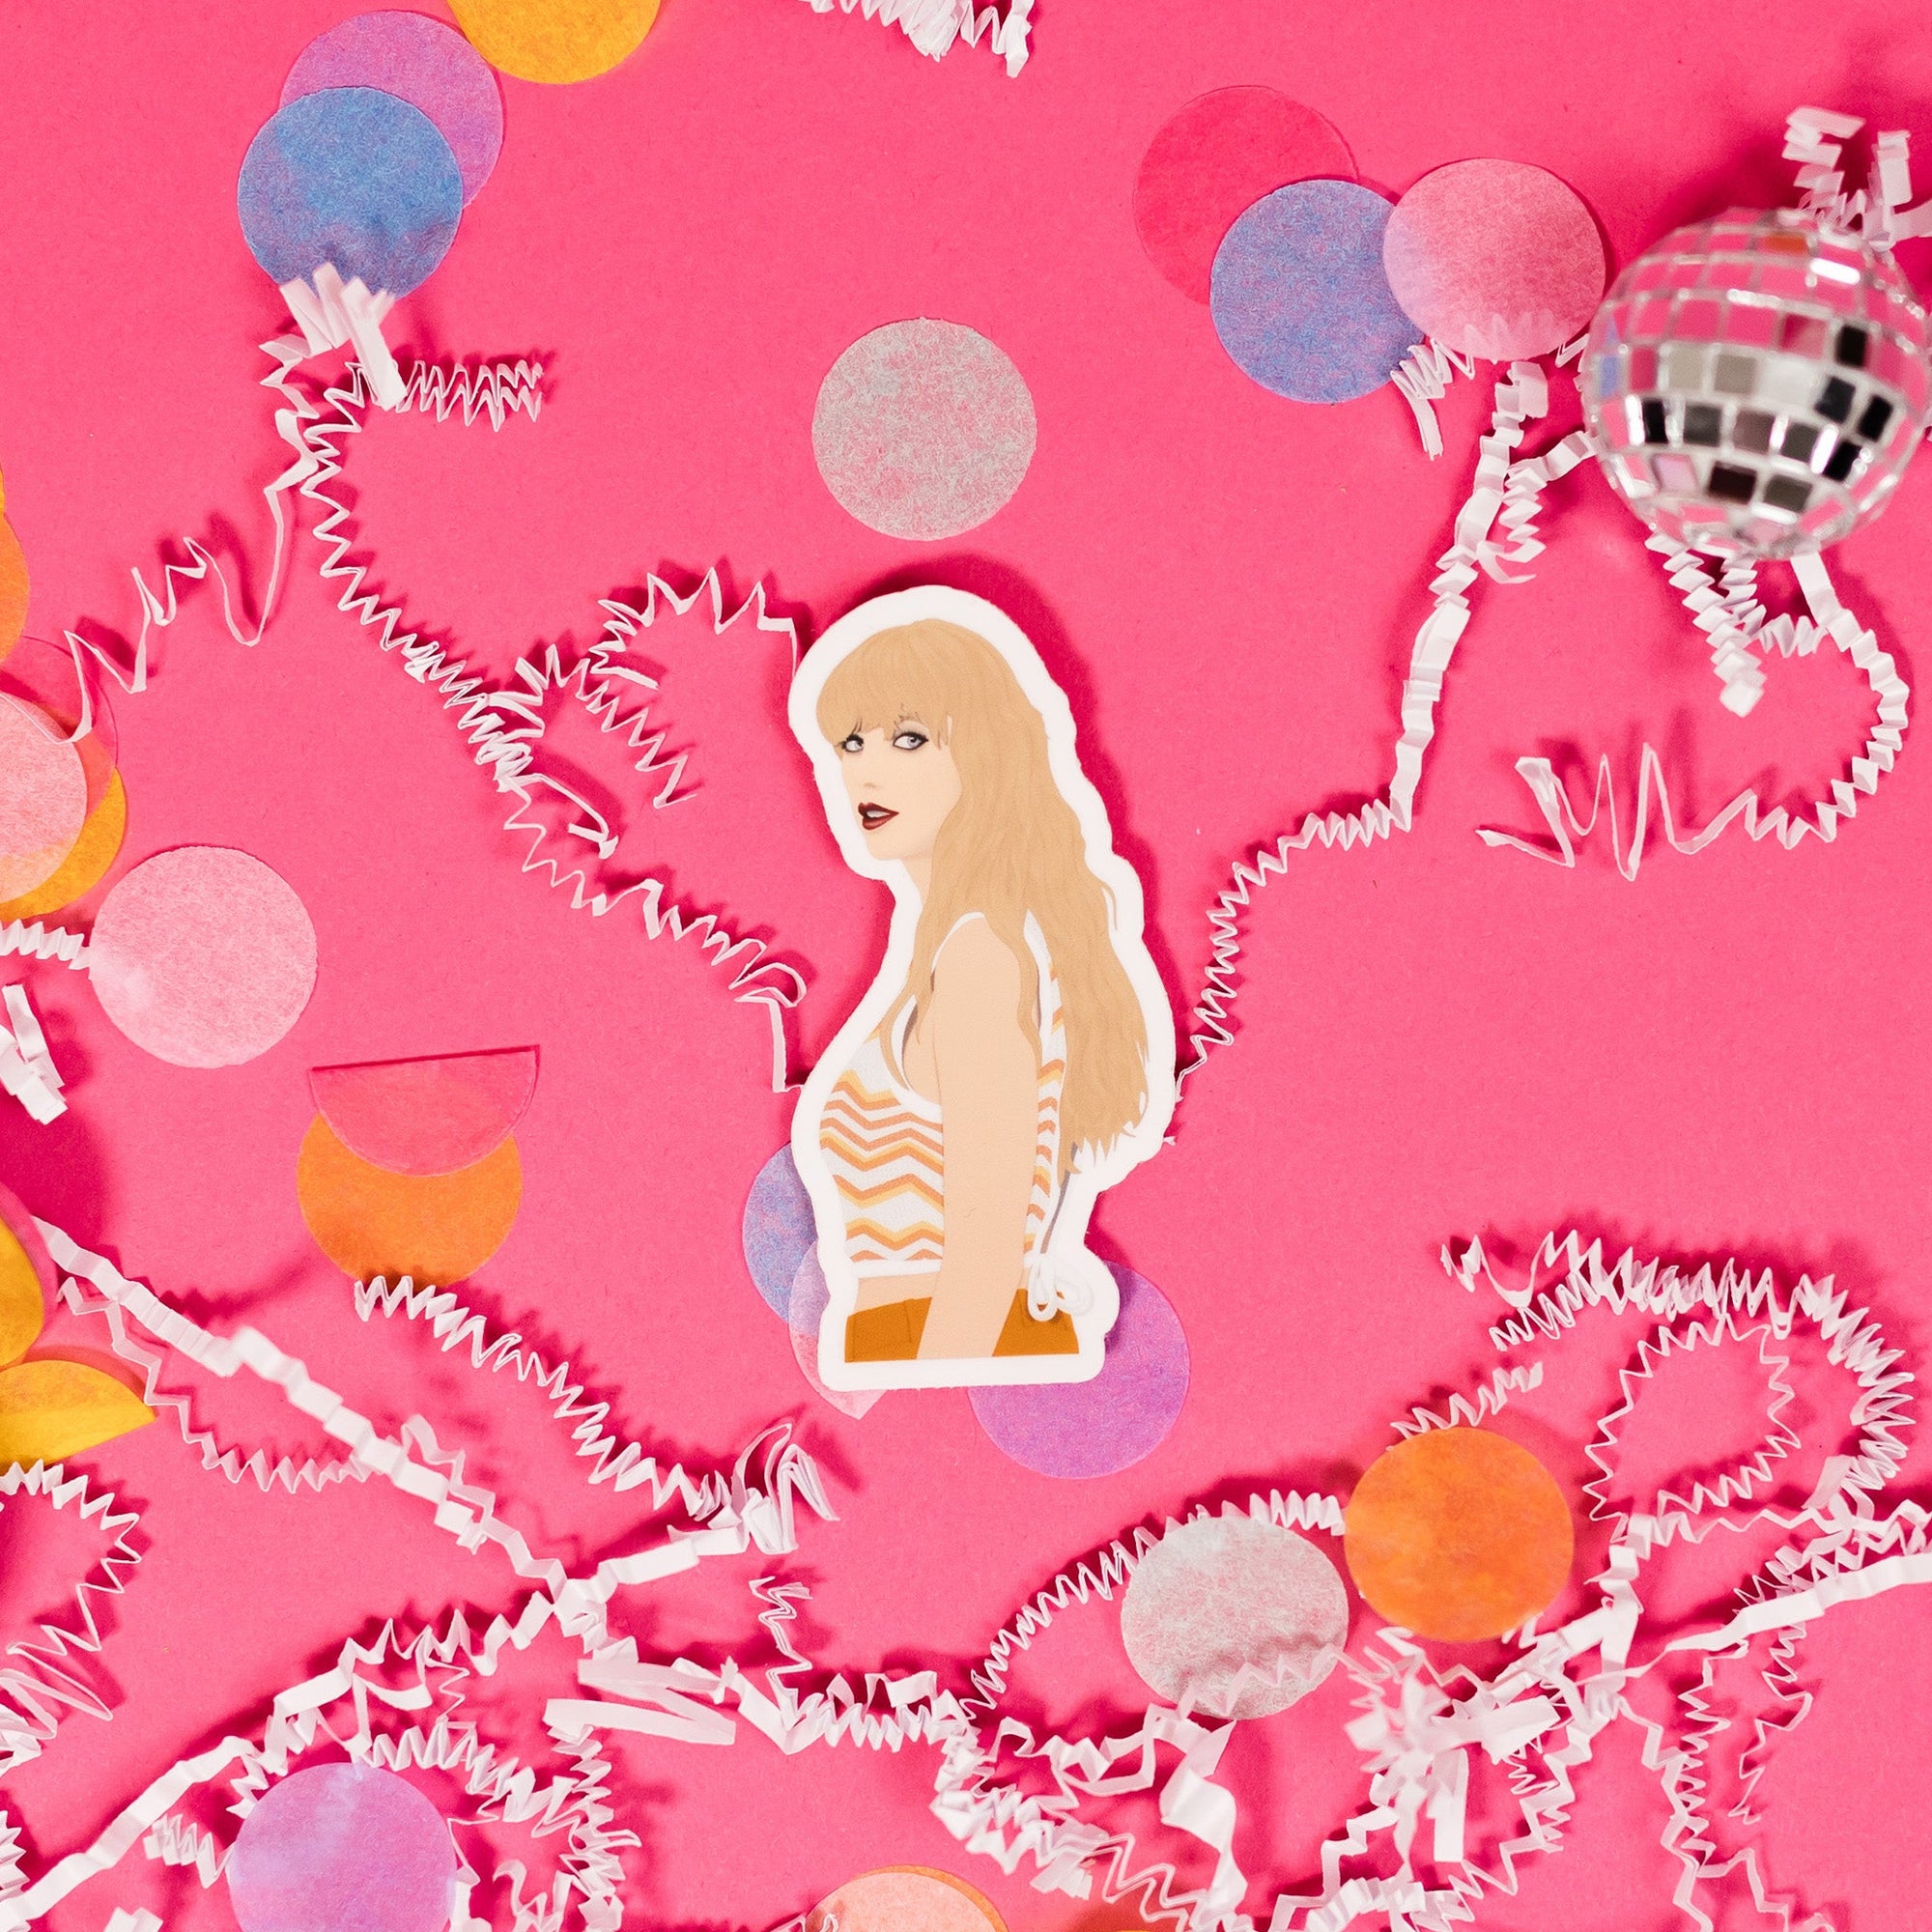 On a hot pink background sits a sticker with white crinkle and big, colorful confetti scattered around. There is a mini disco ball. This Taylor Swift inspired sticker is an illustration of Taylor Swift.